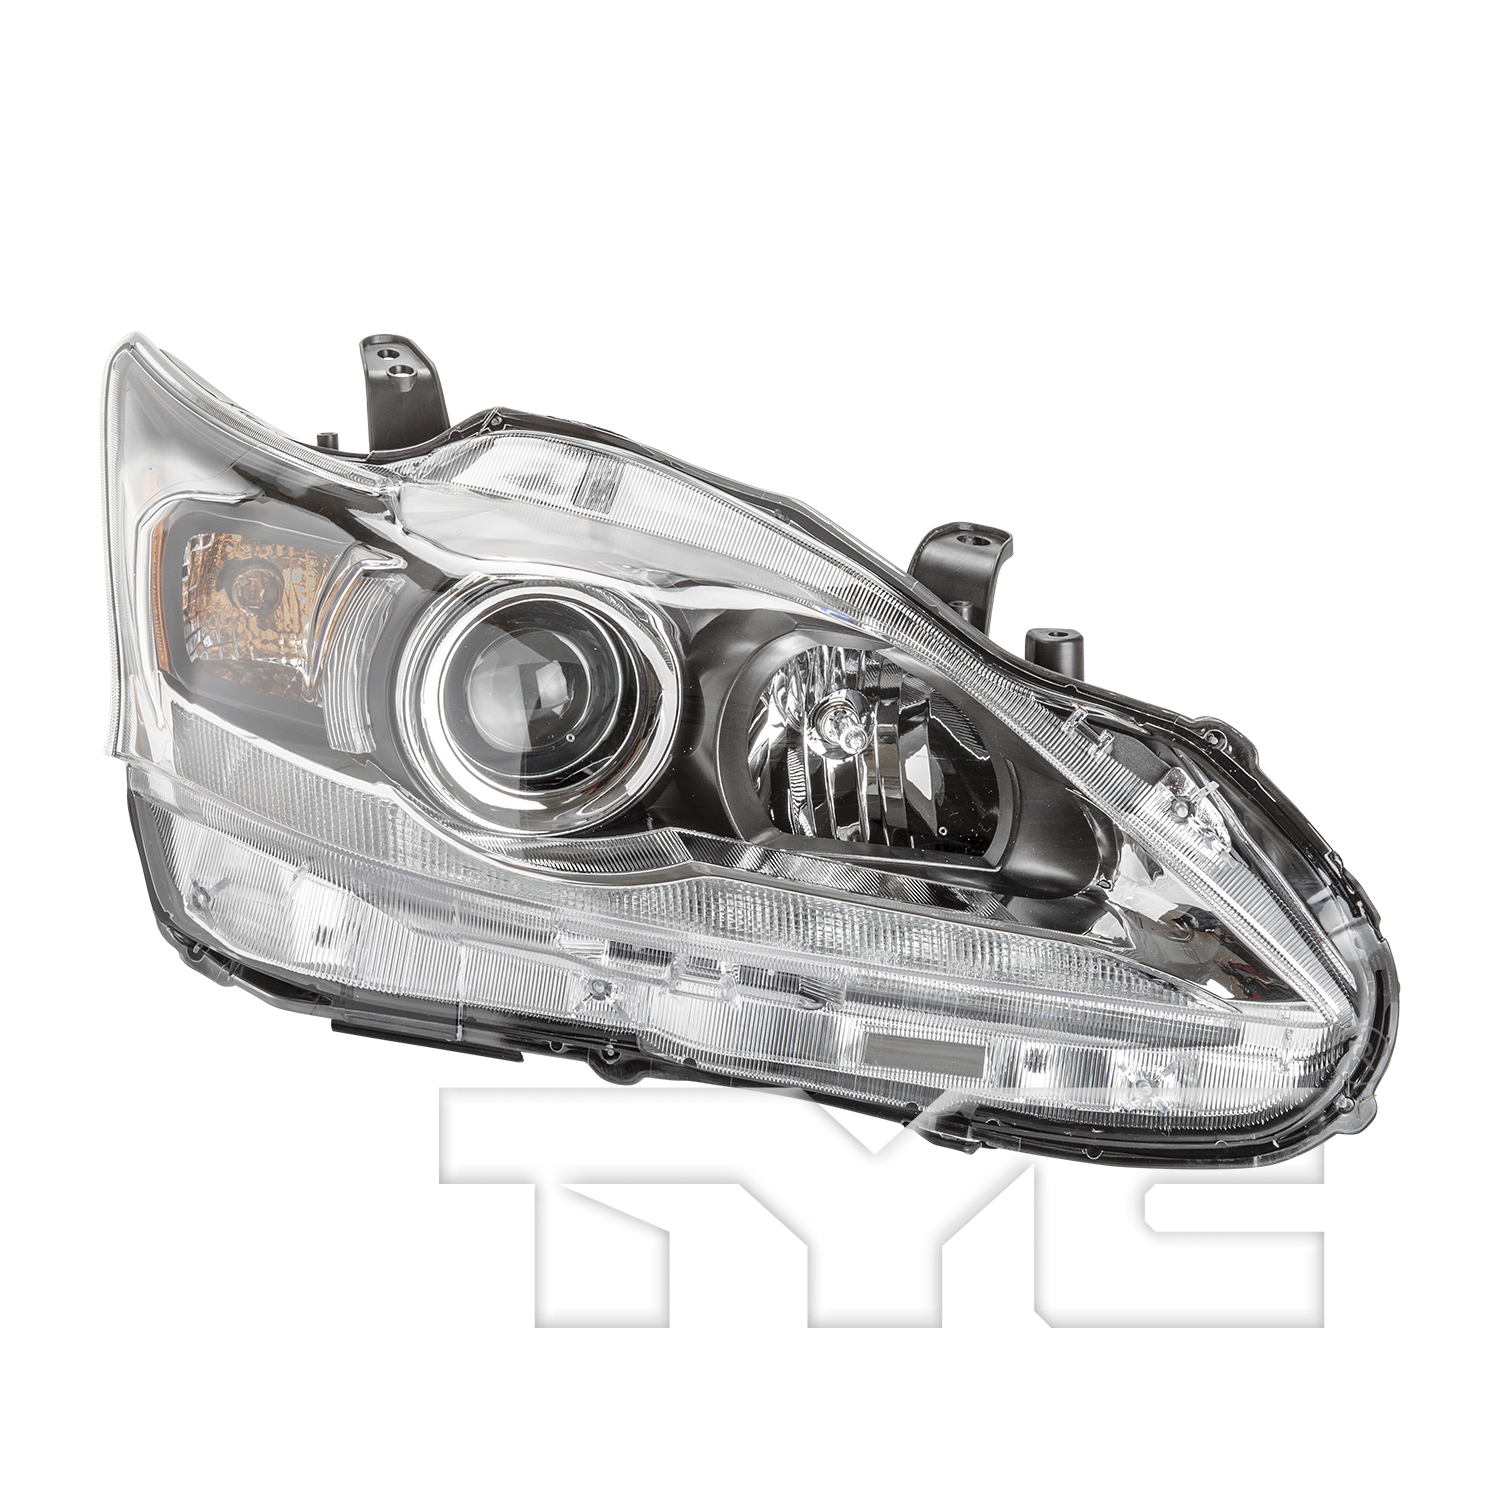 Aftermarket HEADLIGHTS for LEXUS - CT200H, CT200h,11-11,RT Headlamp assy composite